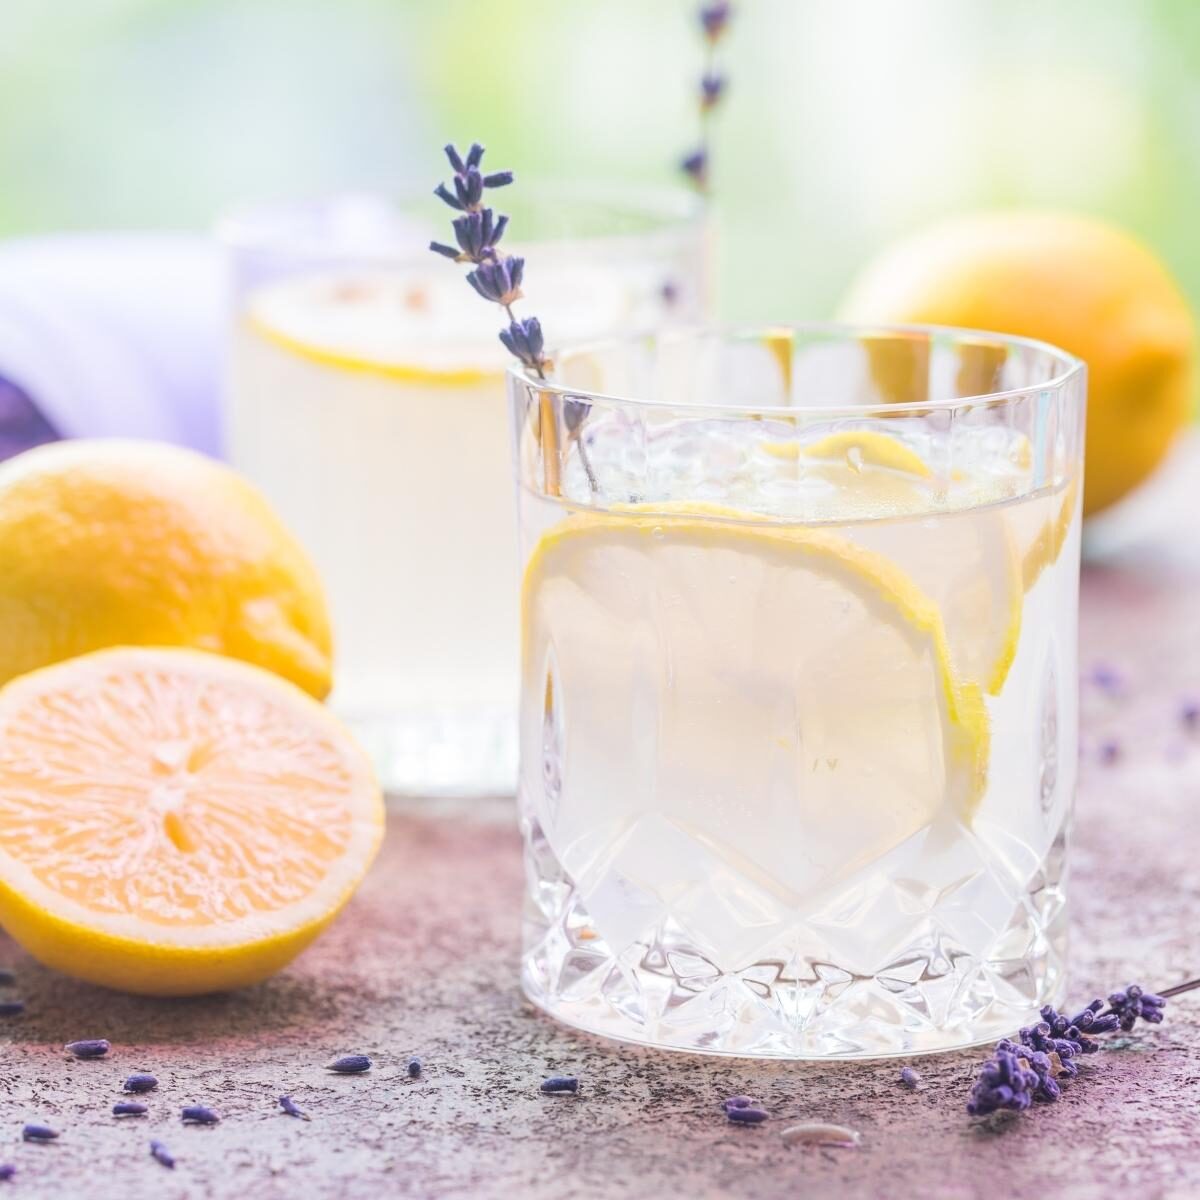 Pale yellow and lavender drink in a whisky glass. It is garnished with lemon wheel and lavender sprig with cut lemons beside on a wooden table.